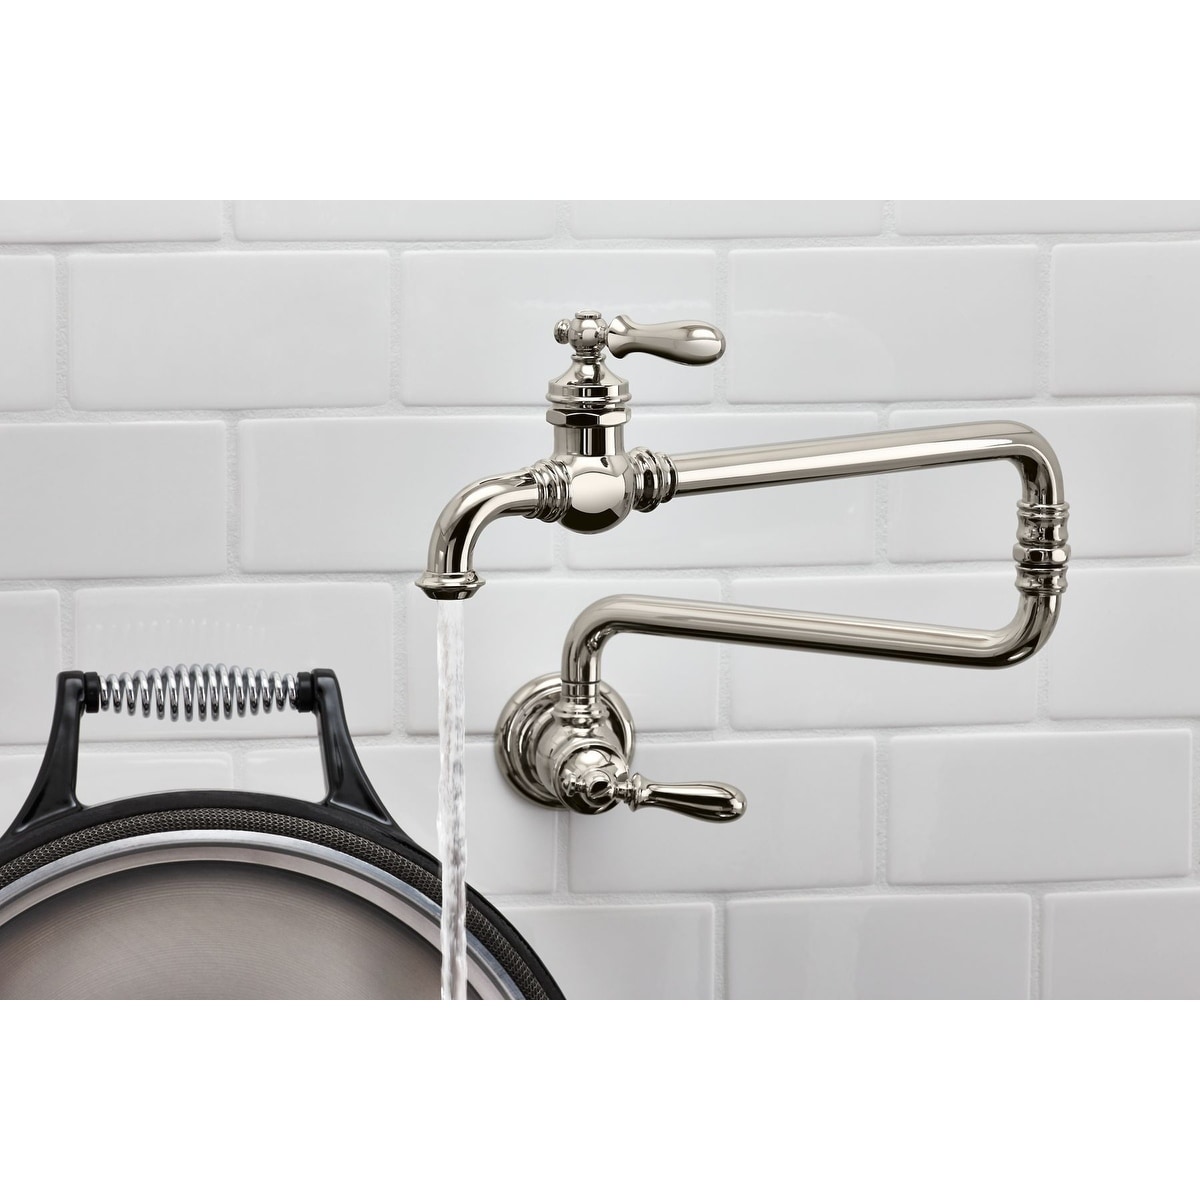 Kohler Artifacts Single Hole Wall Mount Pot Filler Kitchen Sink Faucet With 22 Extended Spout Overstock 21382074